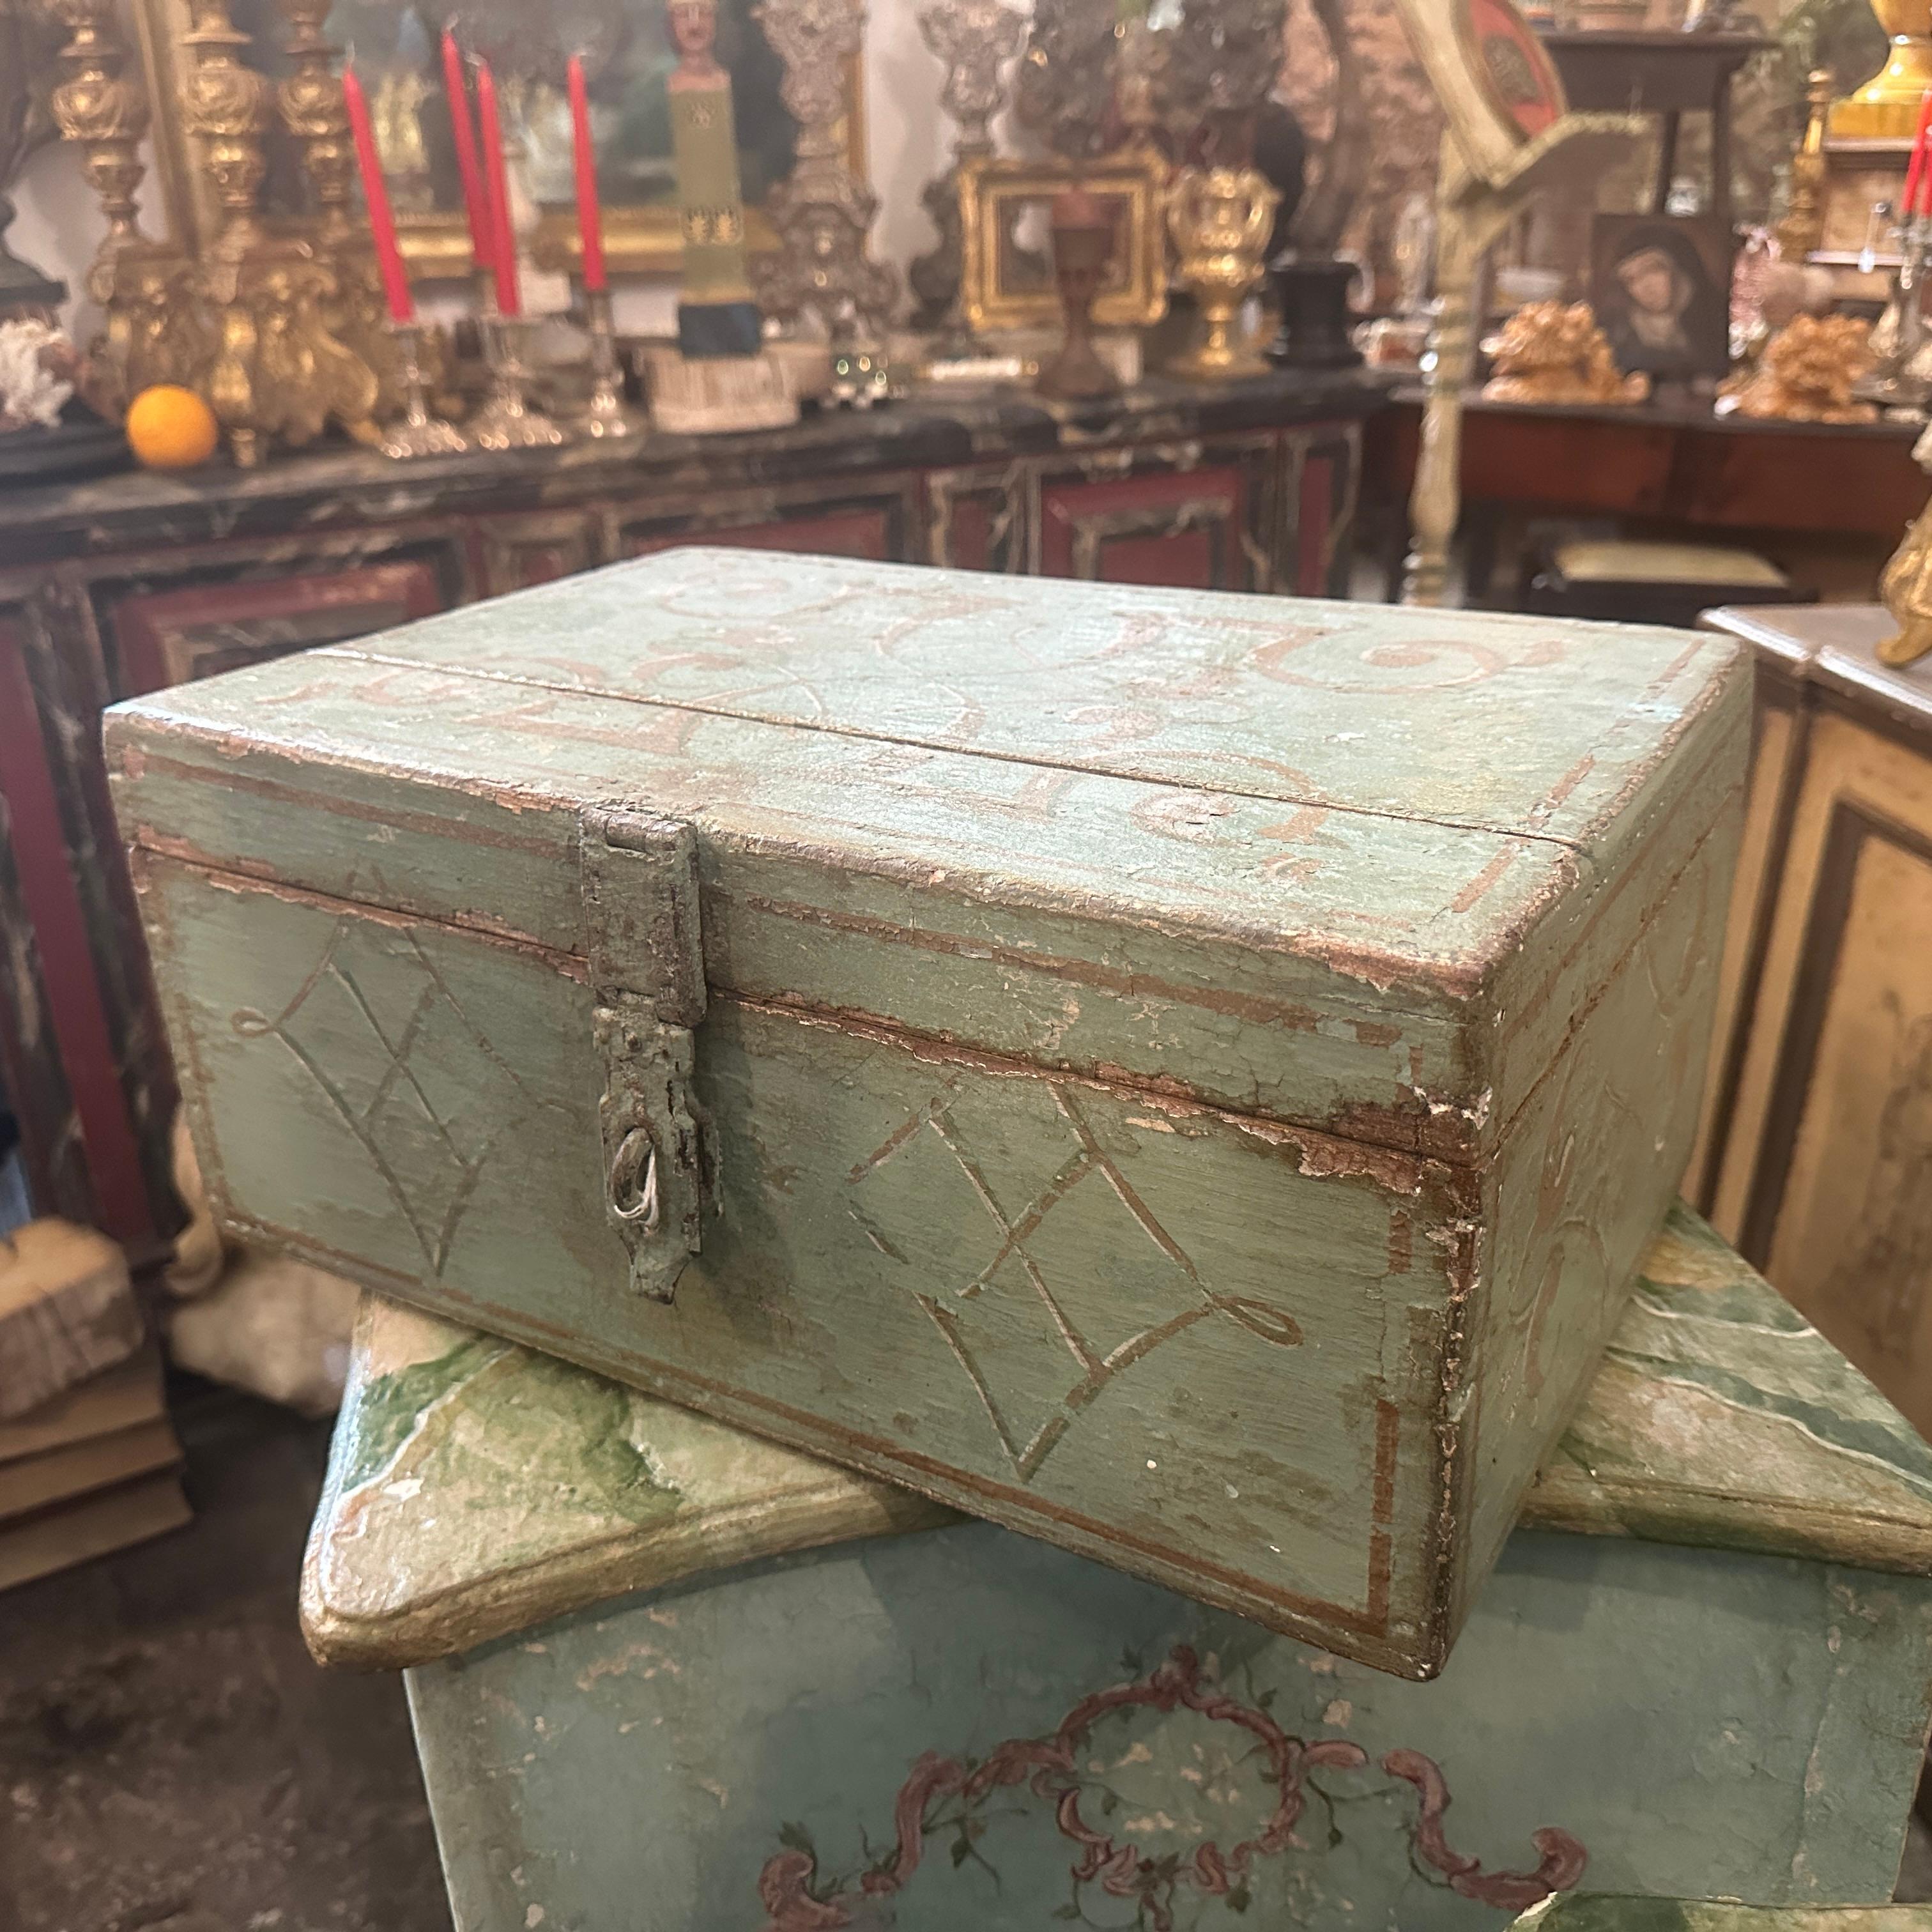 This lacquered wood Sicilian box is a unique and culturally rich artifact, combining elements of 19th-century design, regional influence, and artistic craftsmanship. The box is crafted from wood and features a lacquered finish. Lacquering is a